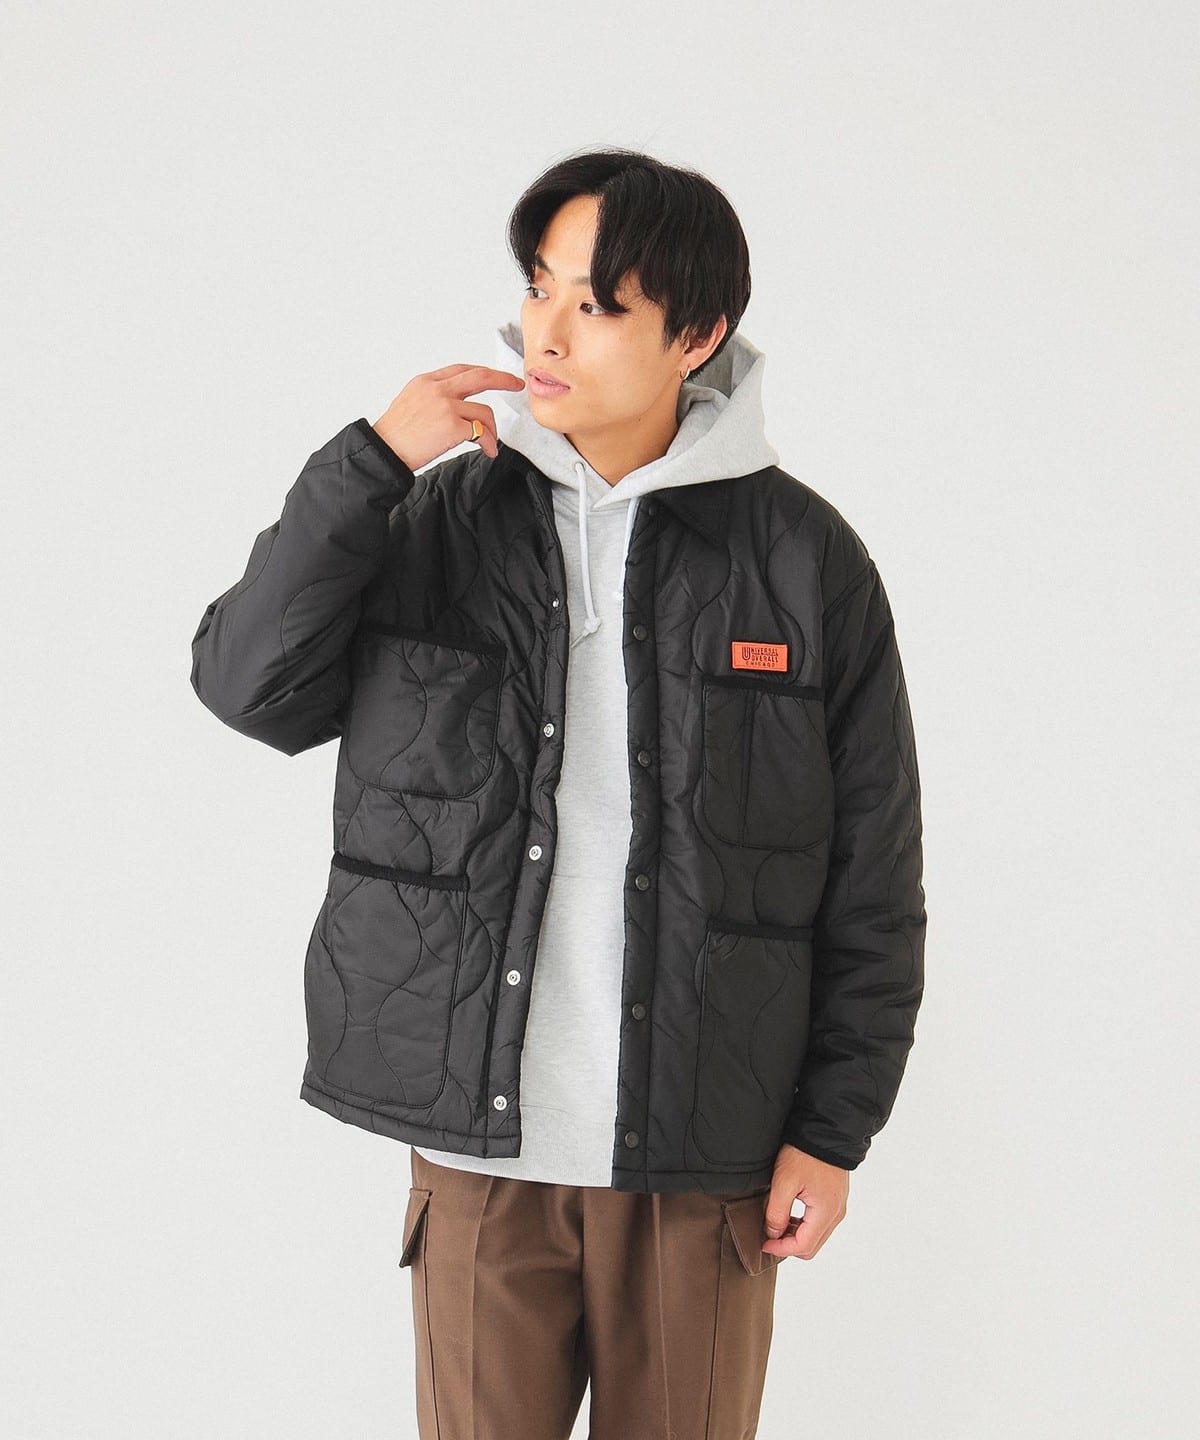 universal overall×beams別注　キルトジャケット